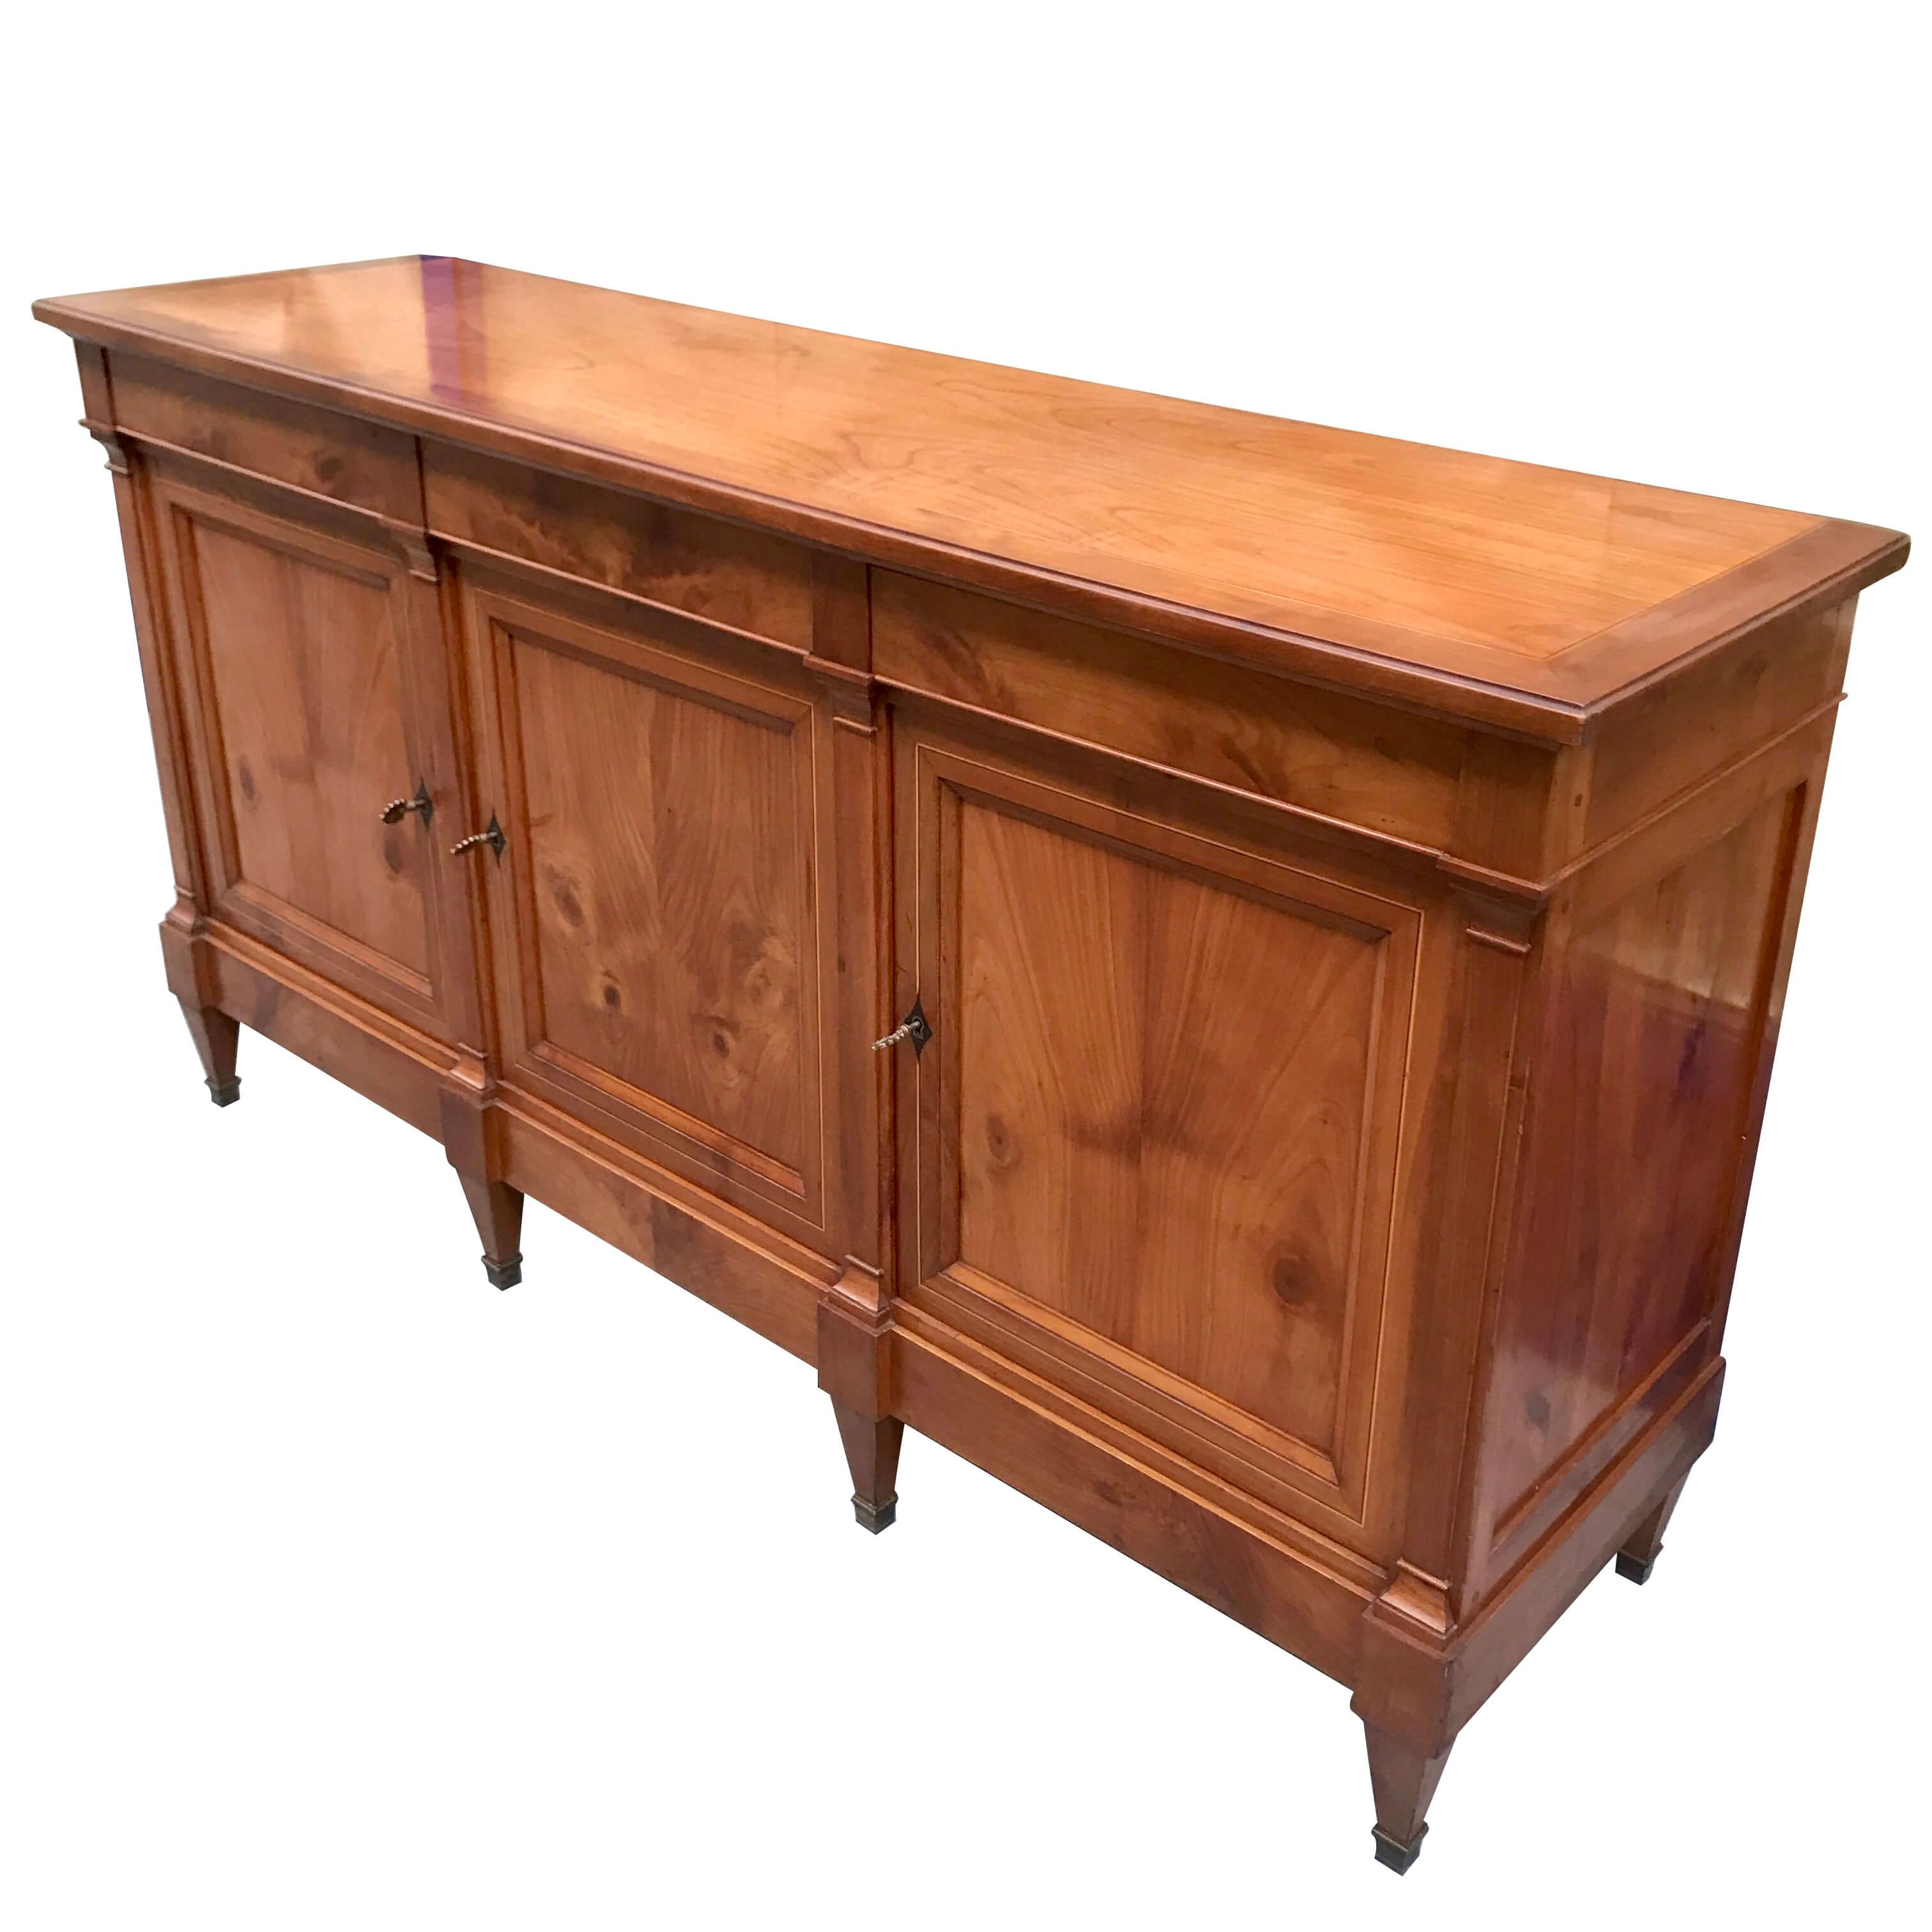 Directoire Style Sideboard With 3 Doors And 3 Drawers In Cherry Wood With  Inlaid Fillets And Bronze Brackets, 19th Century | Intondo With Regard To Sideboard Storage Cabinet With 3 Drawers &amp; 3 Doors (Photo 12 of 15)